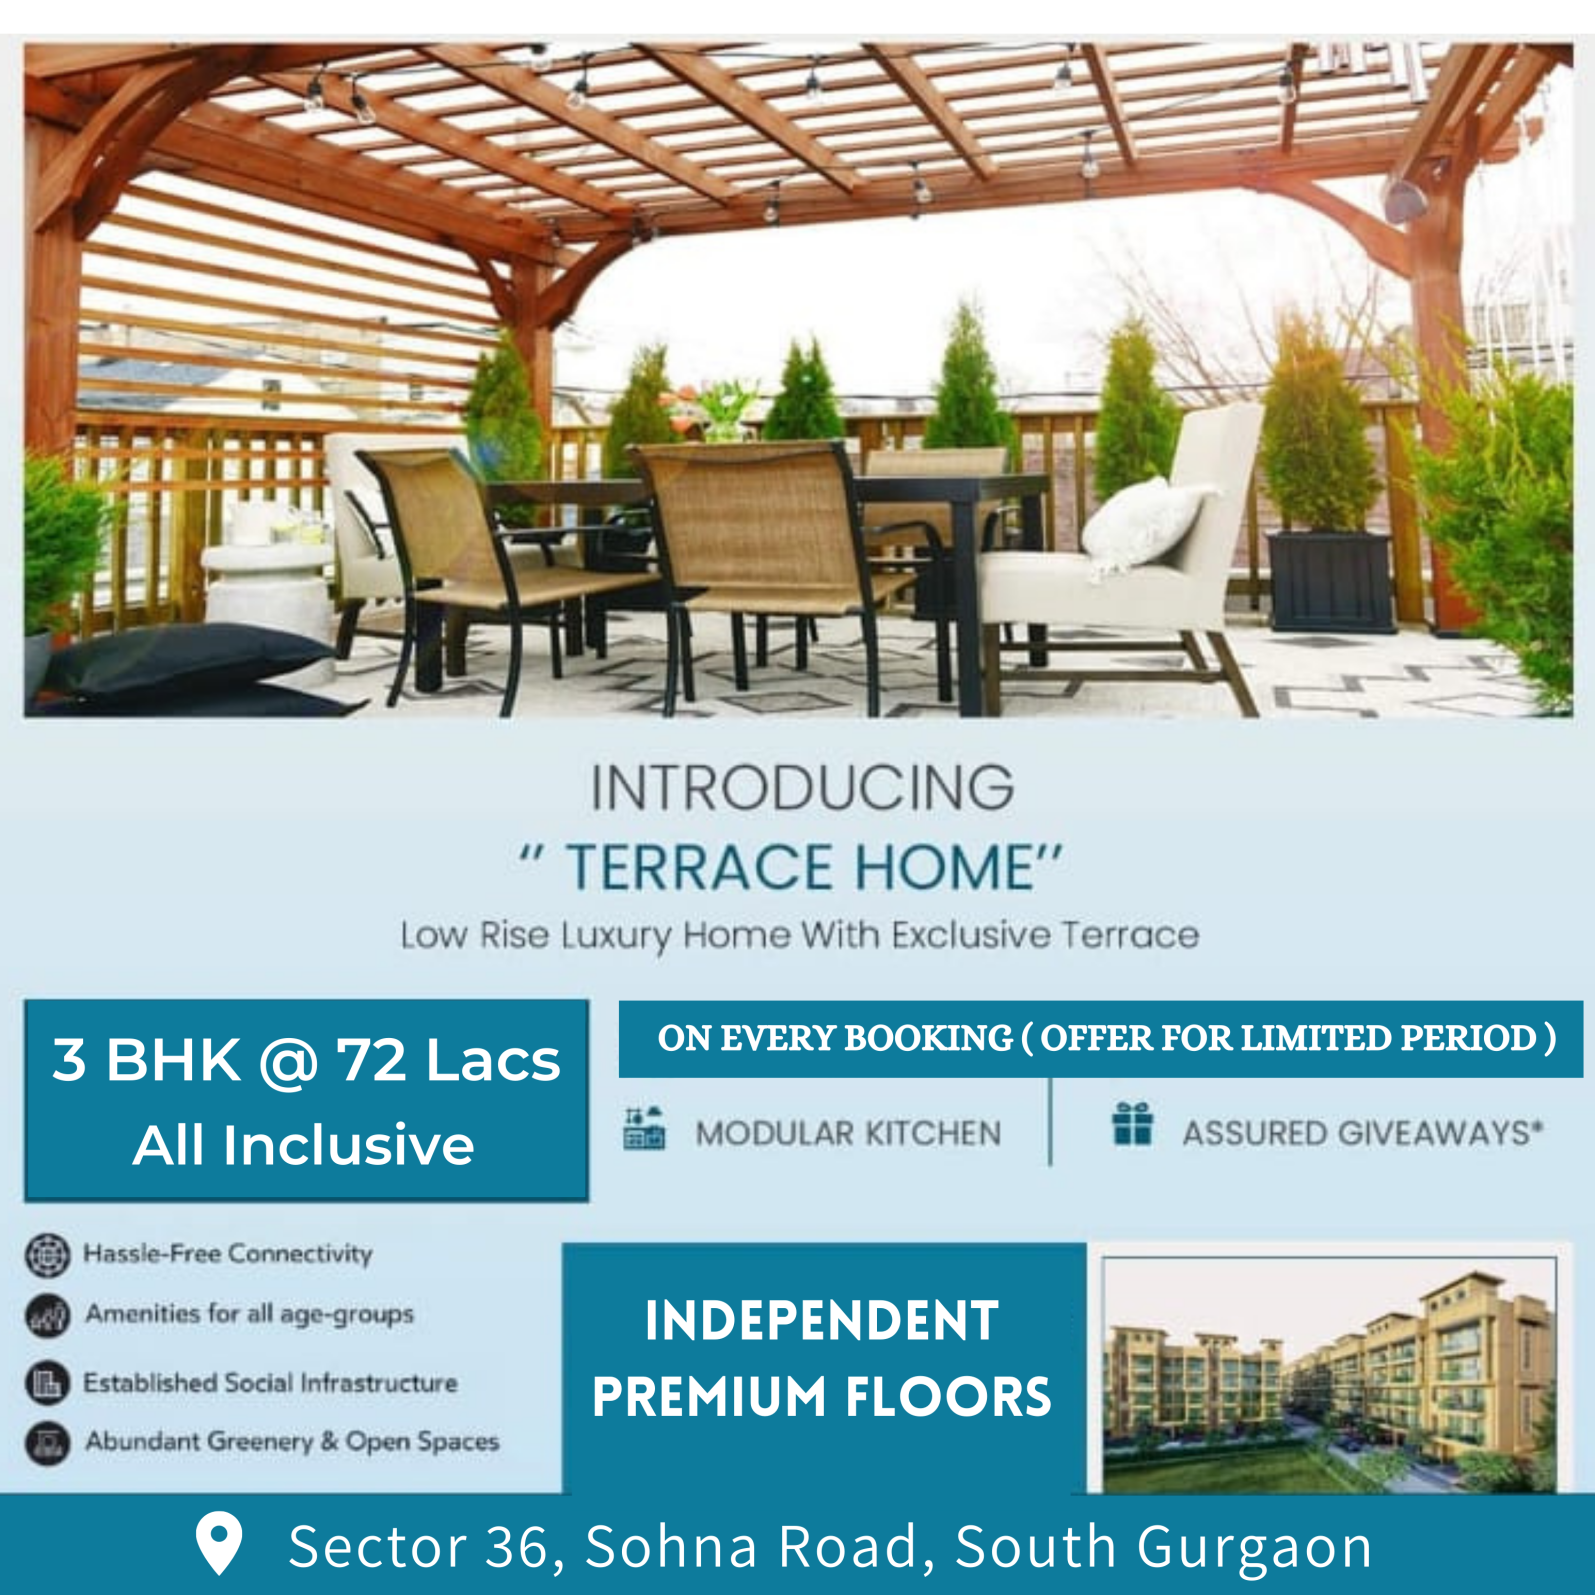 Introducing terrace home low rise luxury home with exclusive terrace at Signature Global Park 4 & 5, Sauth of Gurgaon